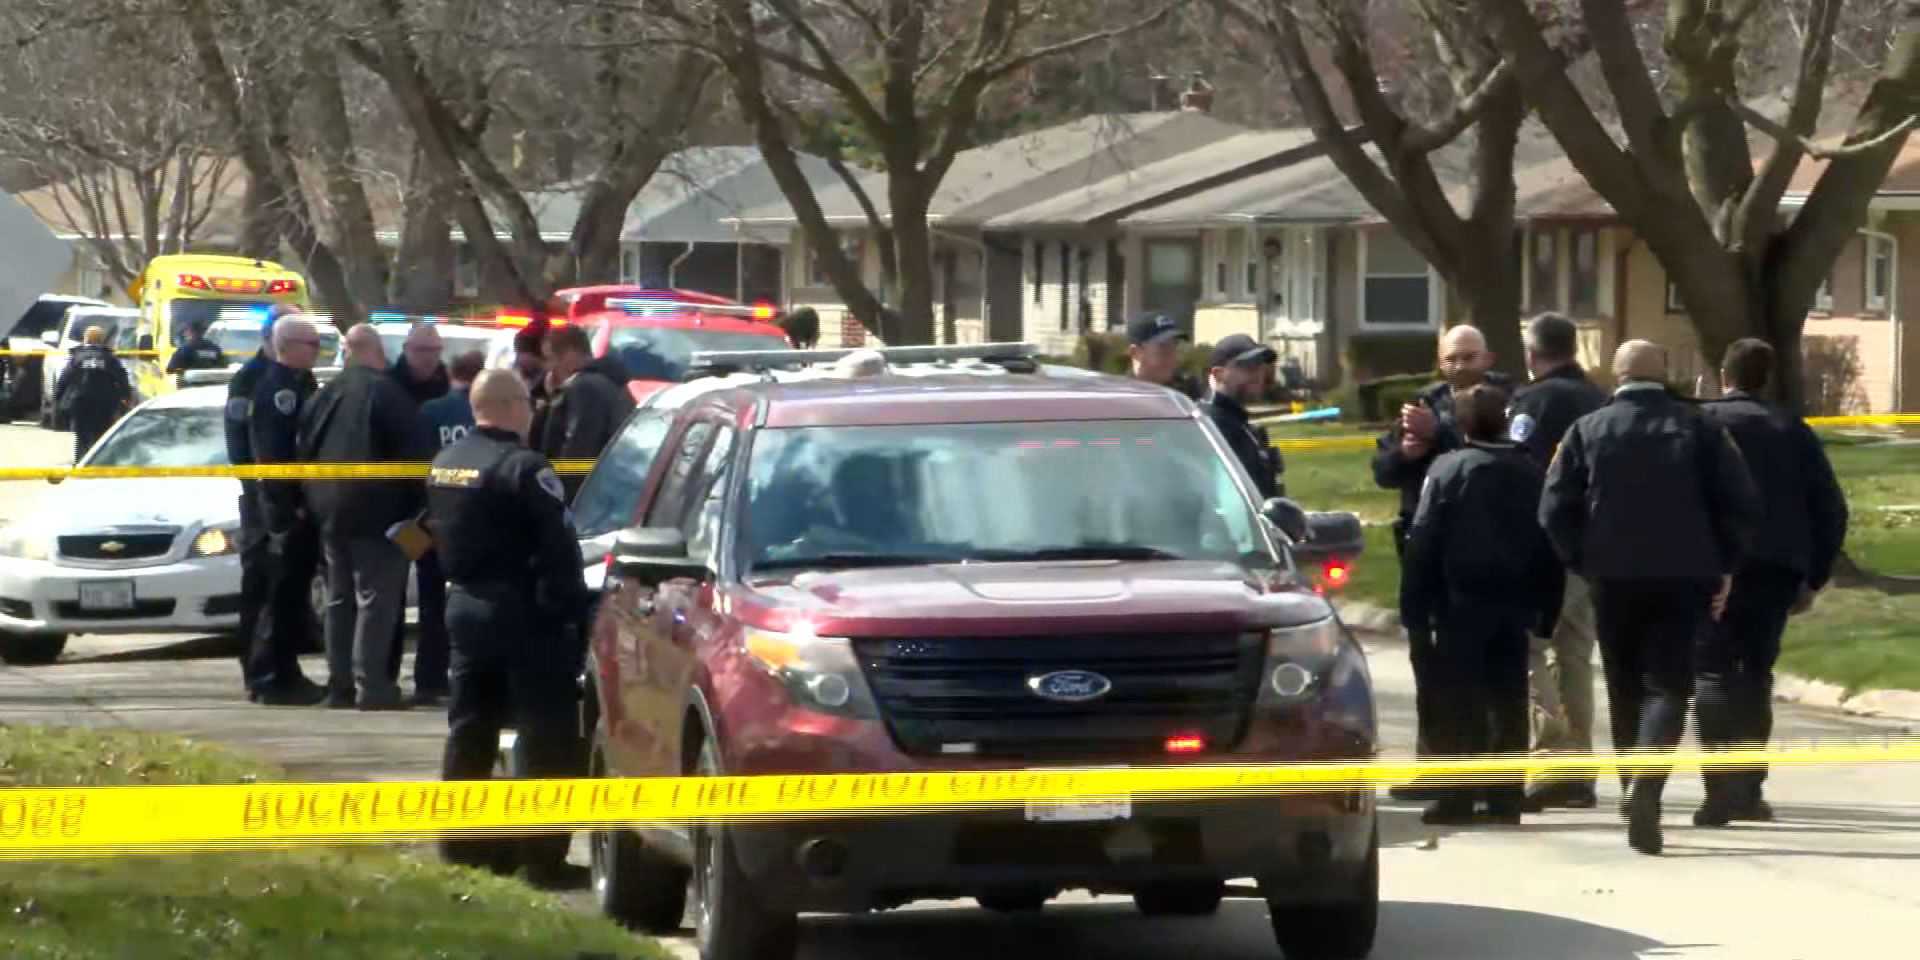 Emergency personnel on the scene of a home invasion and stabbing in Rockford, Illinois, on Wednesday, March 27.